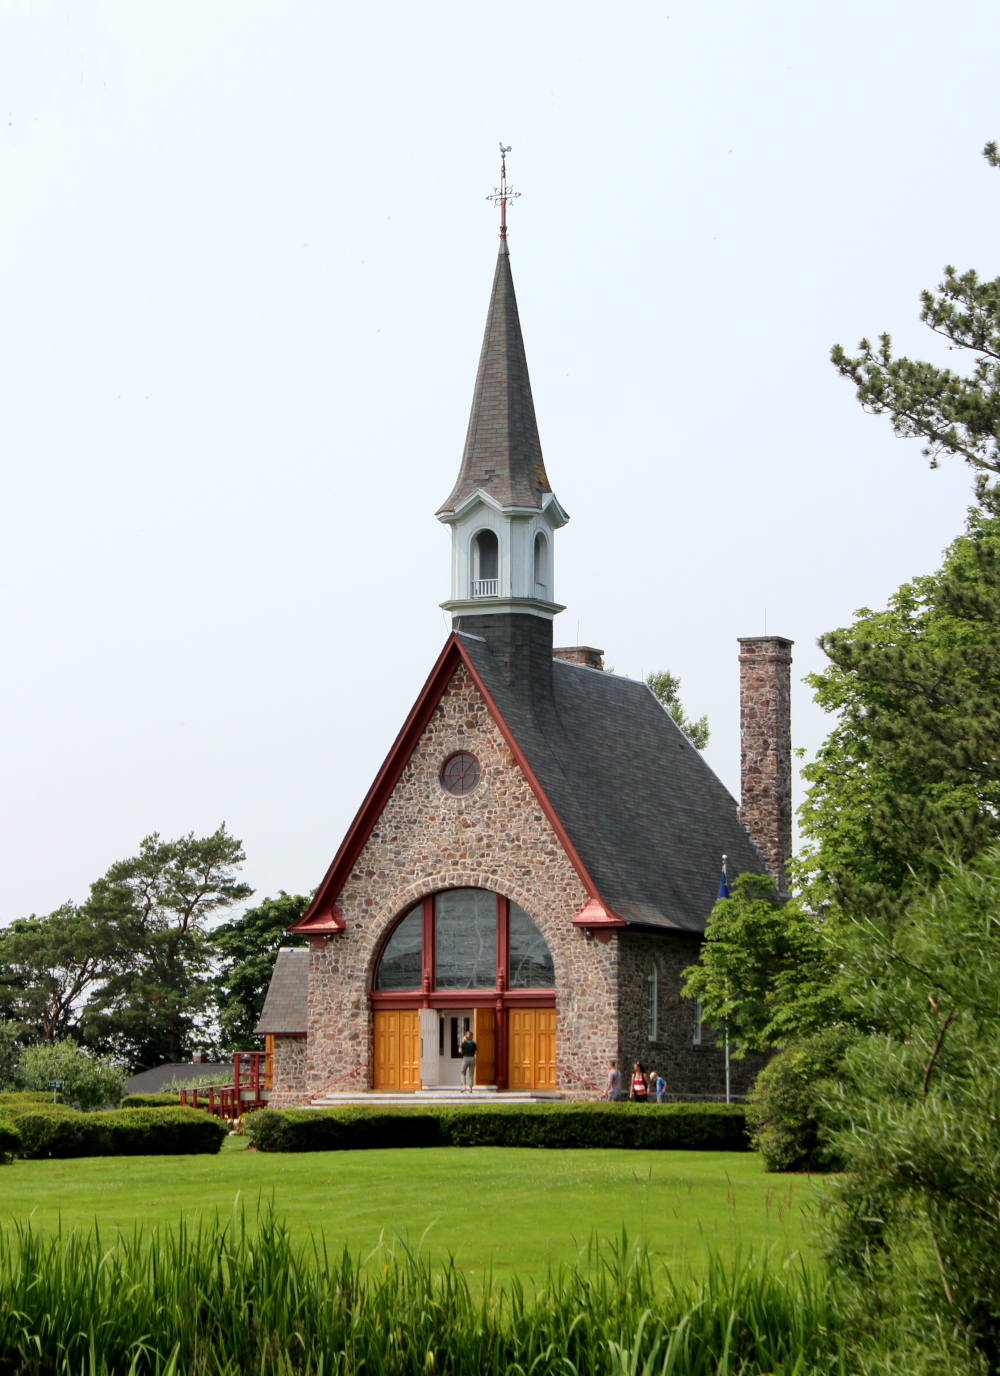 The Memorial Church lies just behind Evangeline at Grand Pré in Nova Scotia.  The church is a memorial to the original Saint-Charles-des-Mines which is believed to have been on this site.